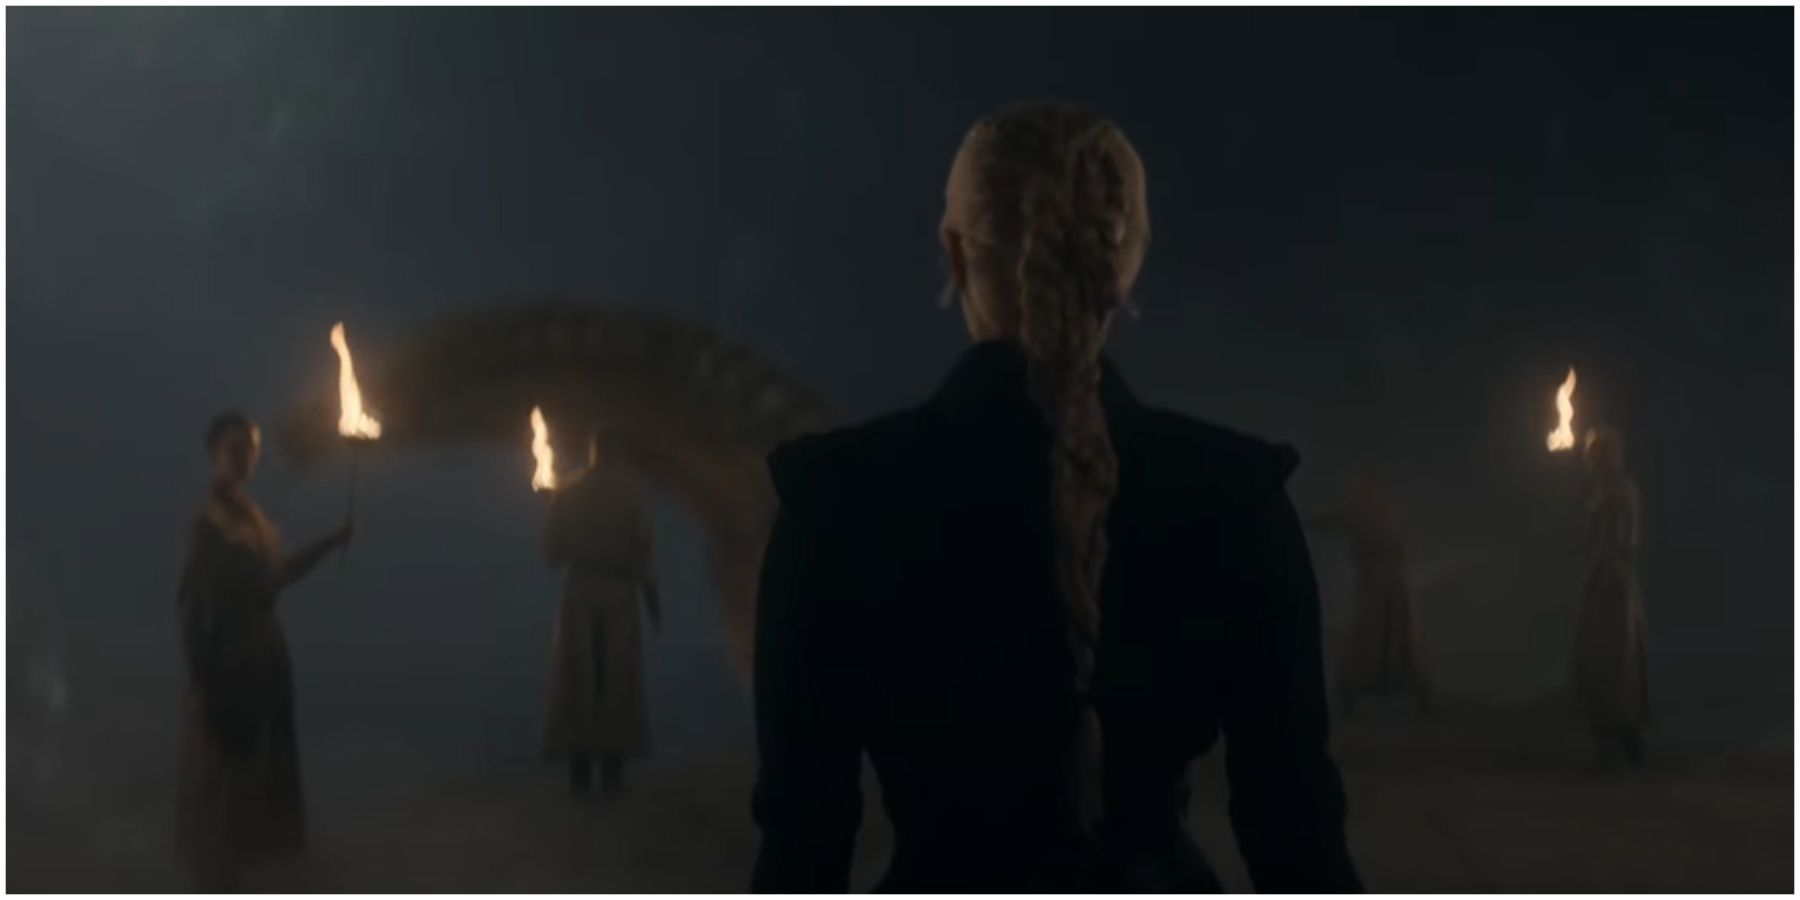 Rhaenyra about to mount Syrax in House of the Dragon Season 2 Official Black Trailer.